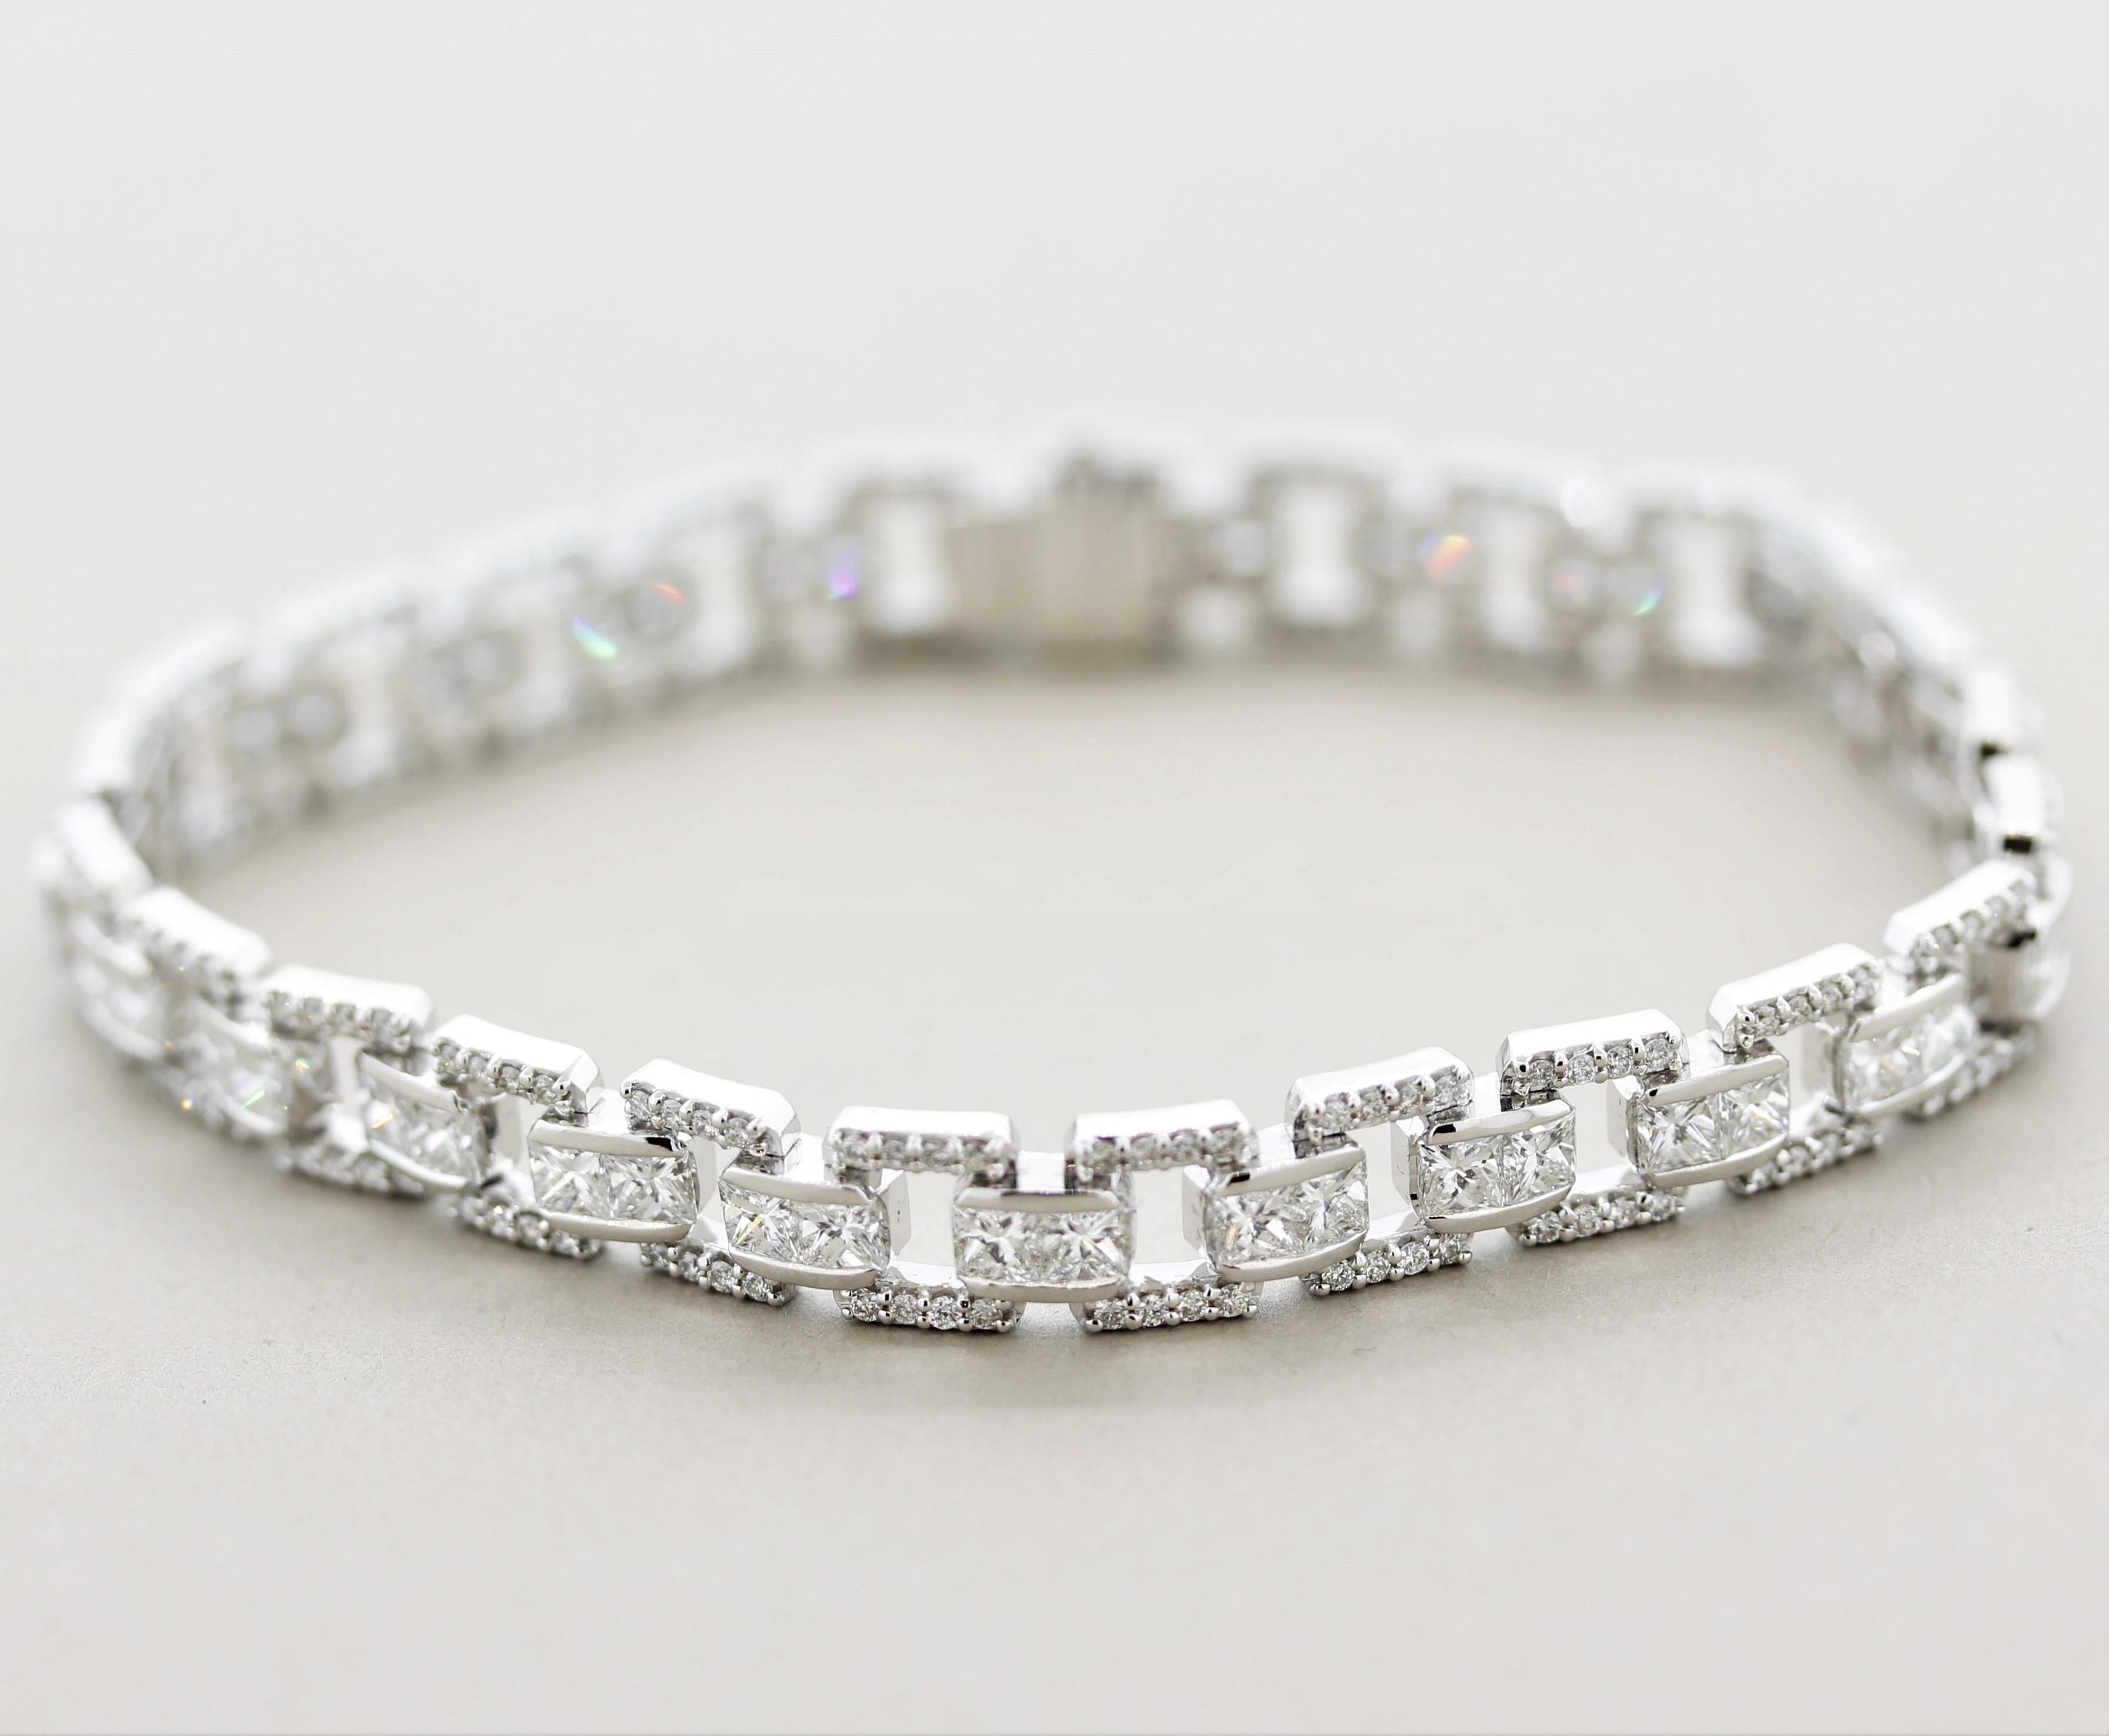 A superb diamond bracelet featuring round brilliant-cuts as well as larger princess-cut diamonds. The round-cut diamonds are set on the outside of the bracelet while the larger princess-cuts are set in pairs in the center of the chains. Diamonds are